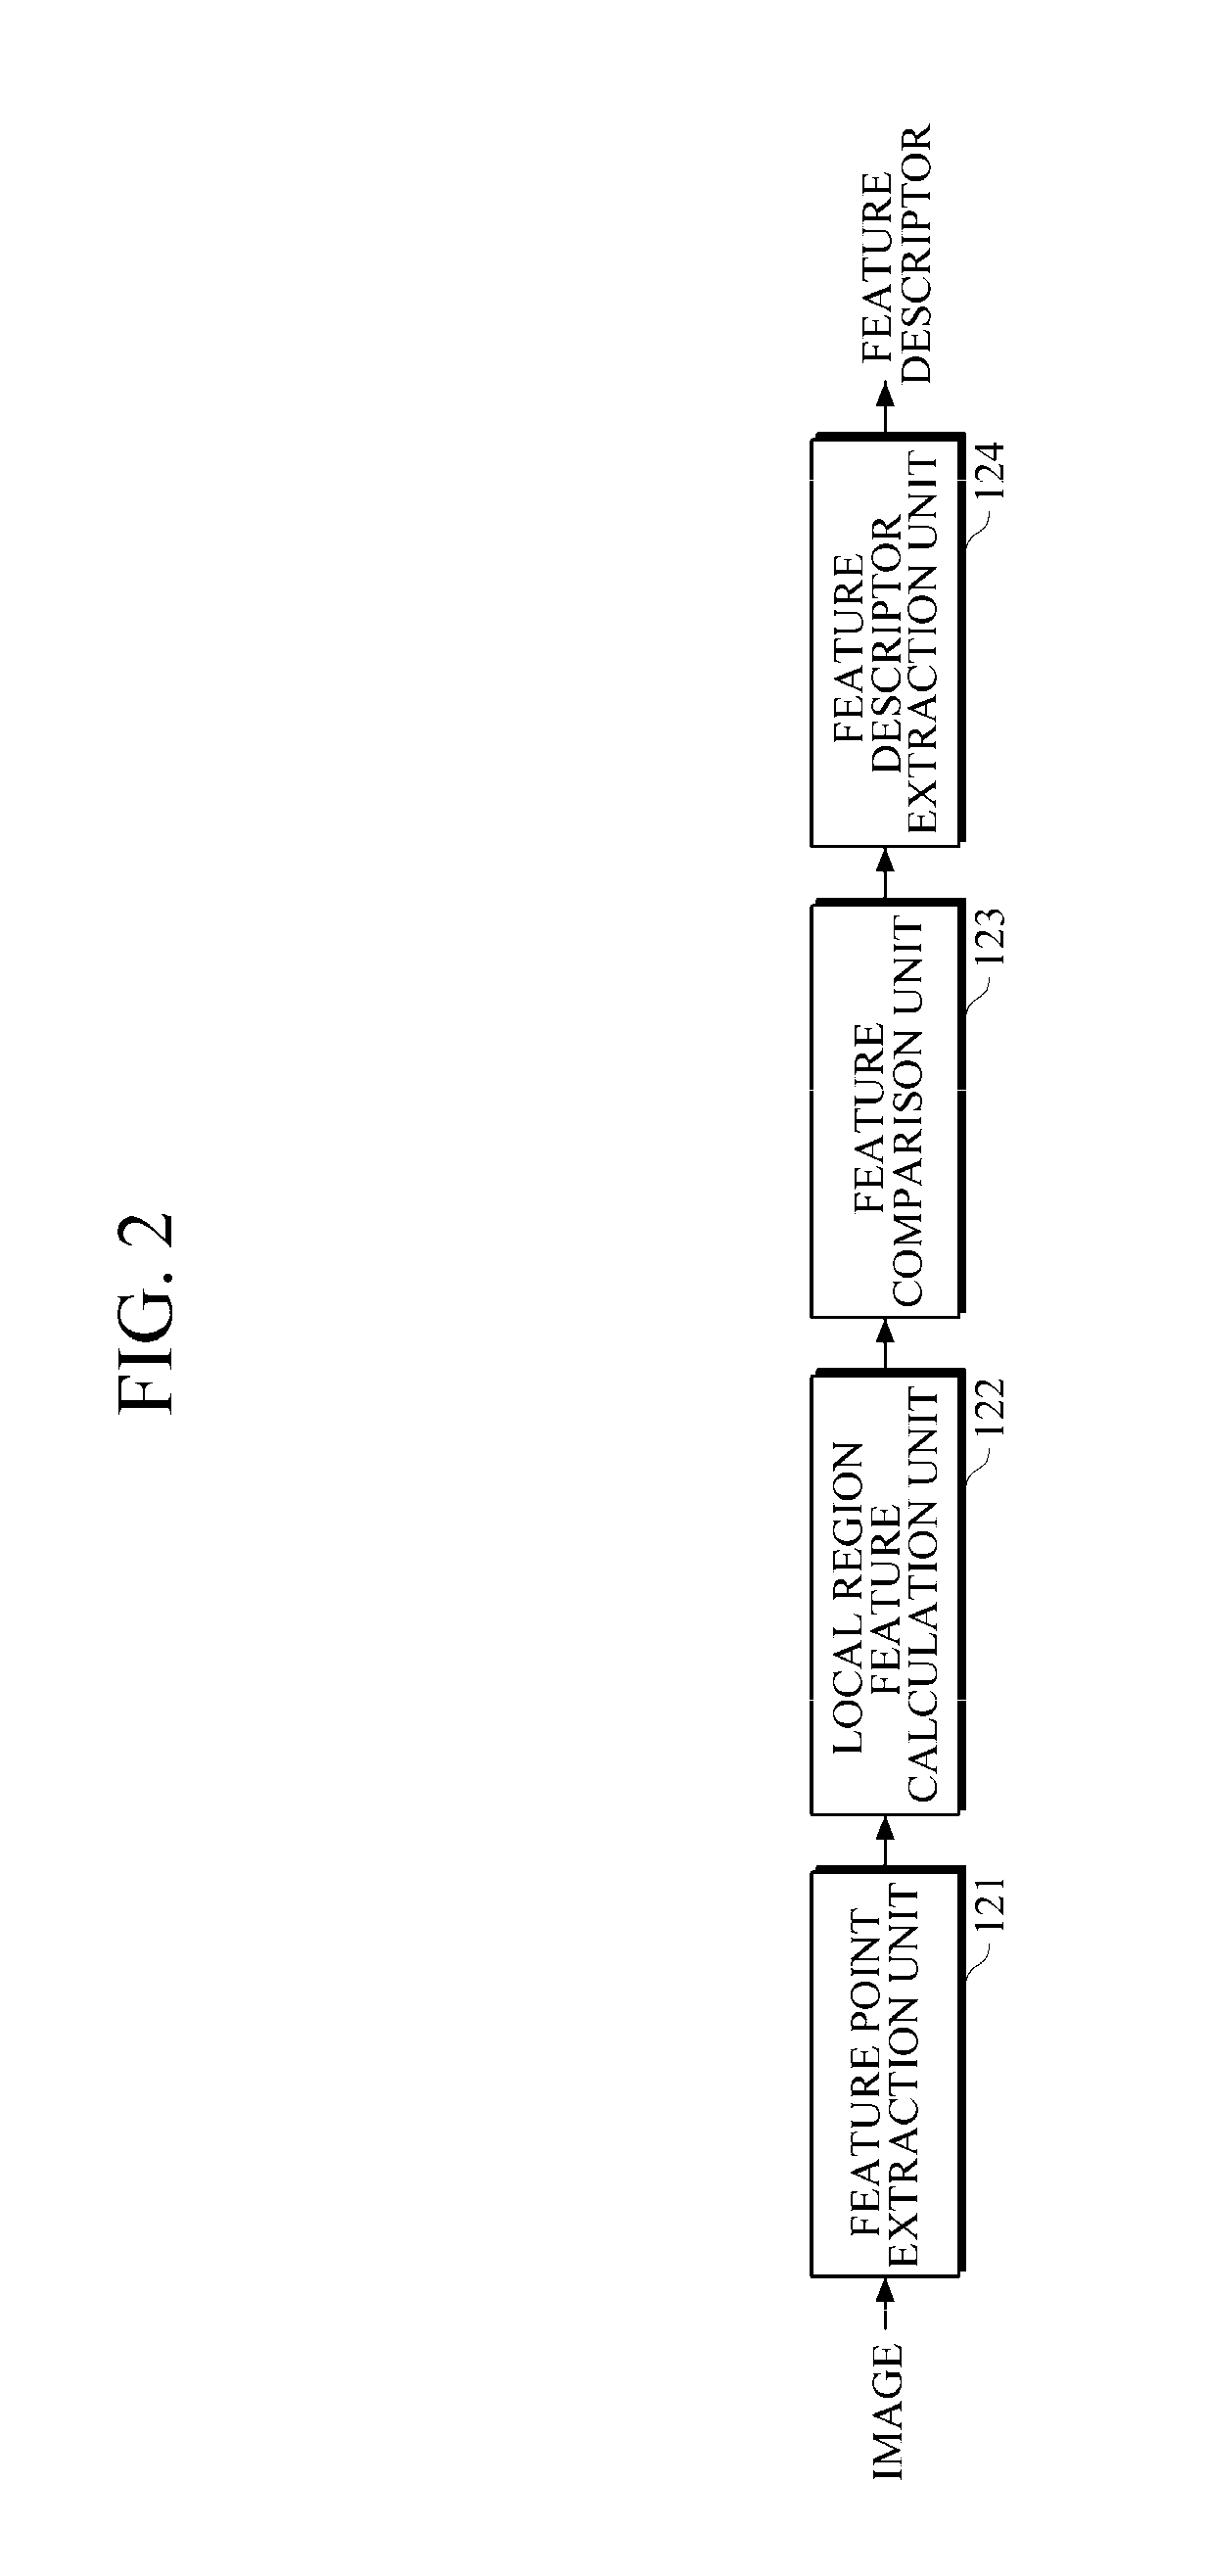 Image recognition apparatus and method using scalable compact local descriptor